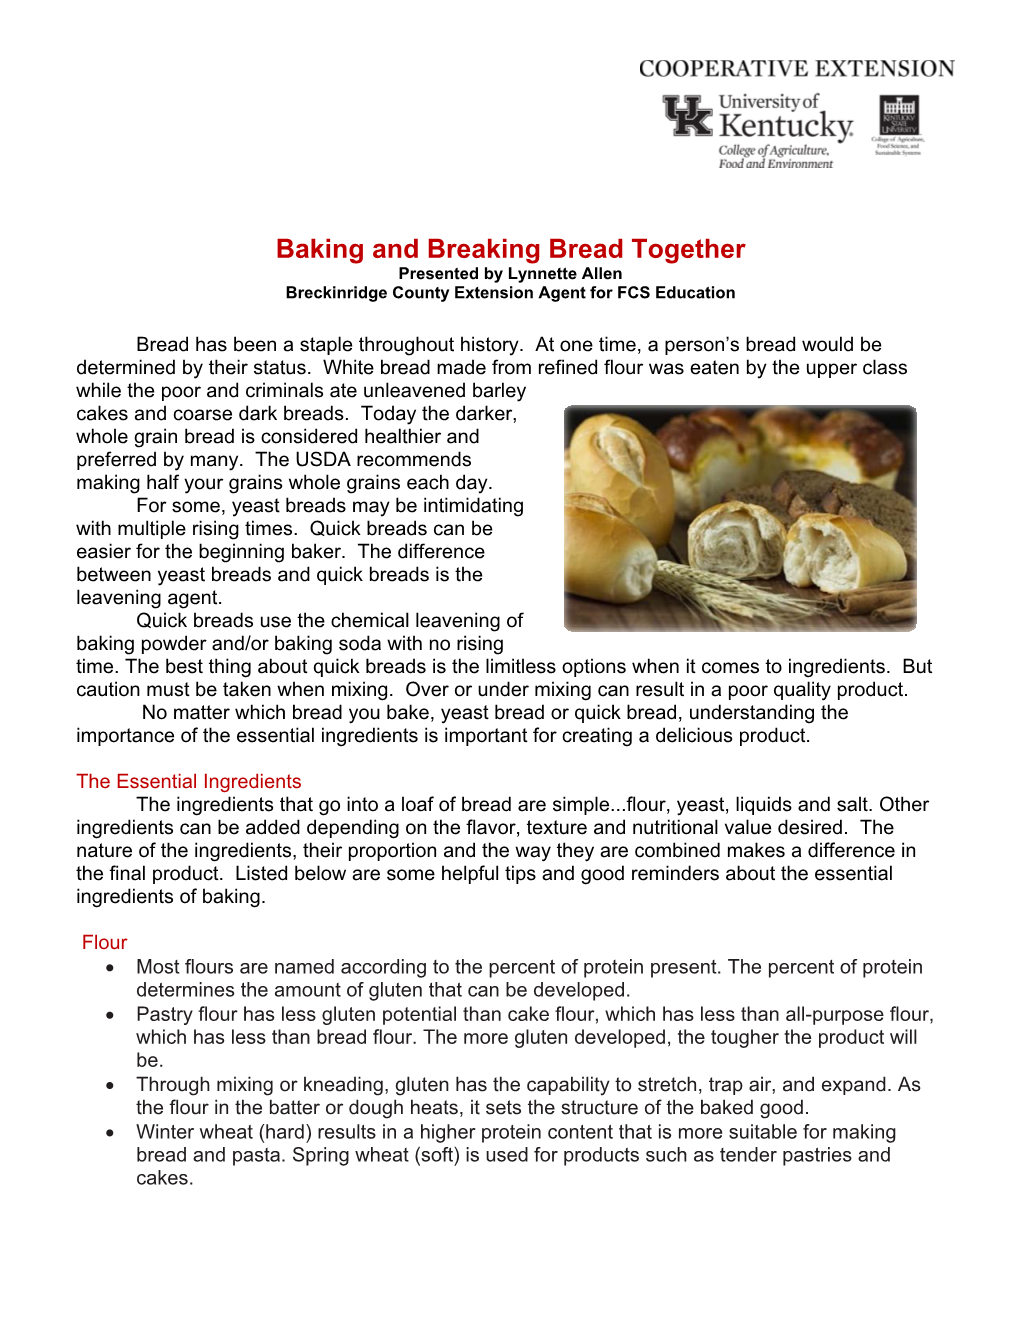 Baking and Breaking Bread Together Presented by Lynnette Allen Breckinridge County Extension Agent for FCS Education